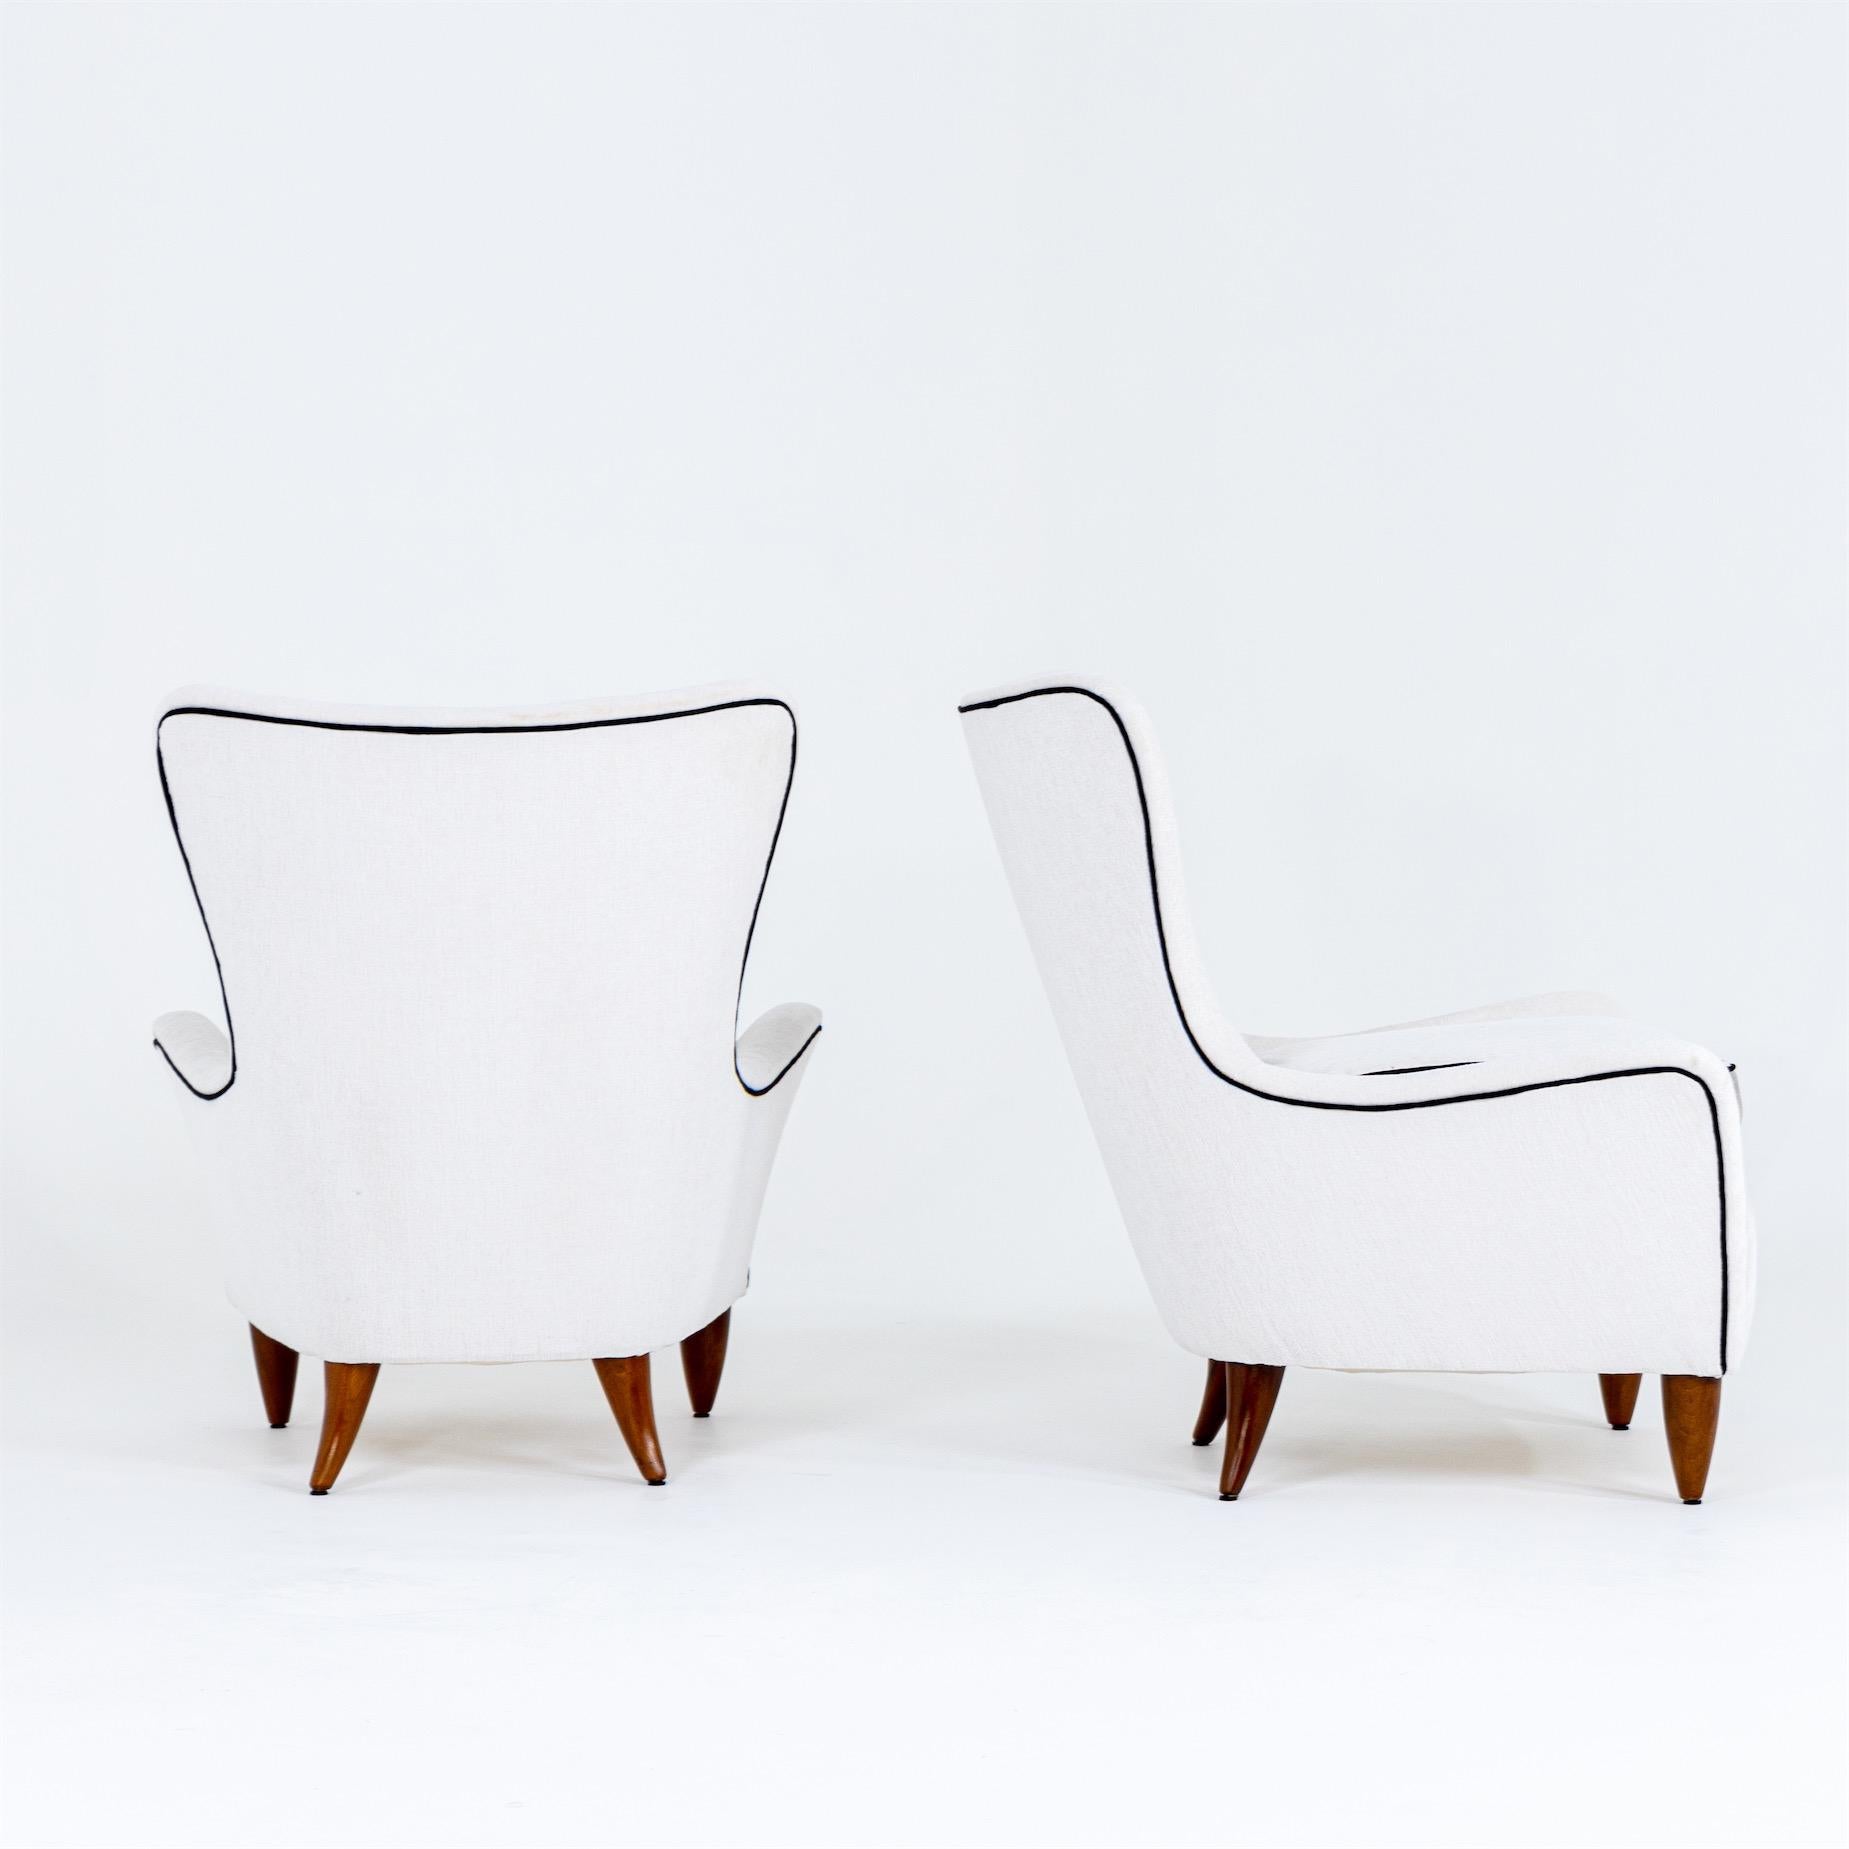 Cherry Lounge Chairs by Brambilla, Italy, 1950s For Sale